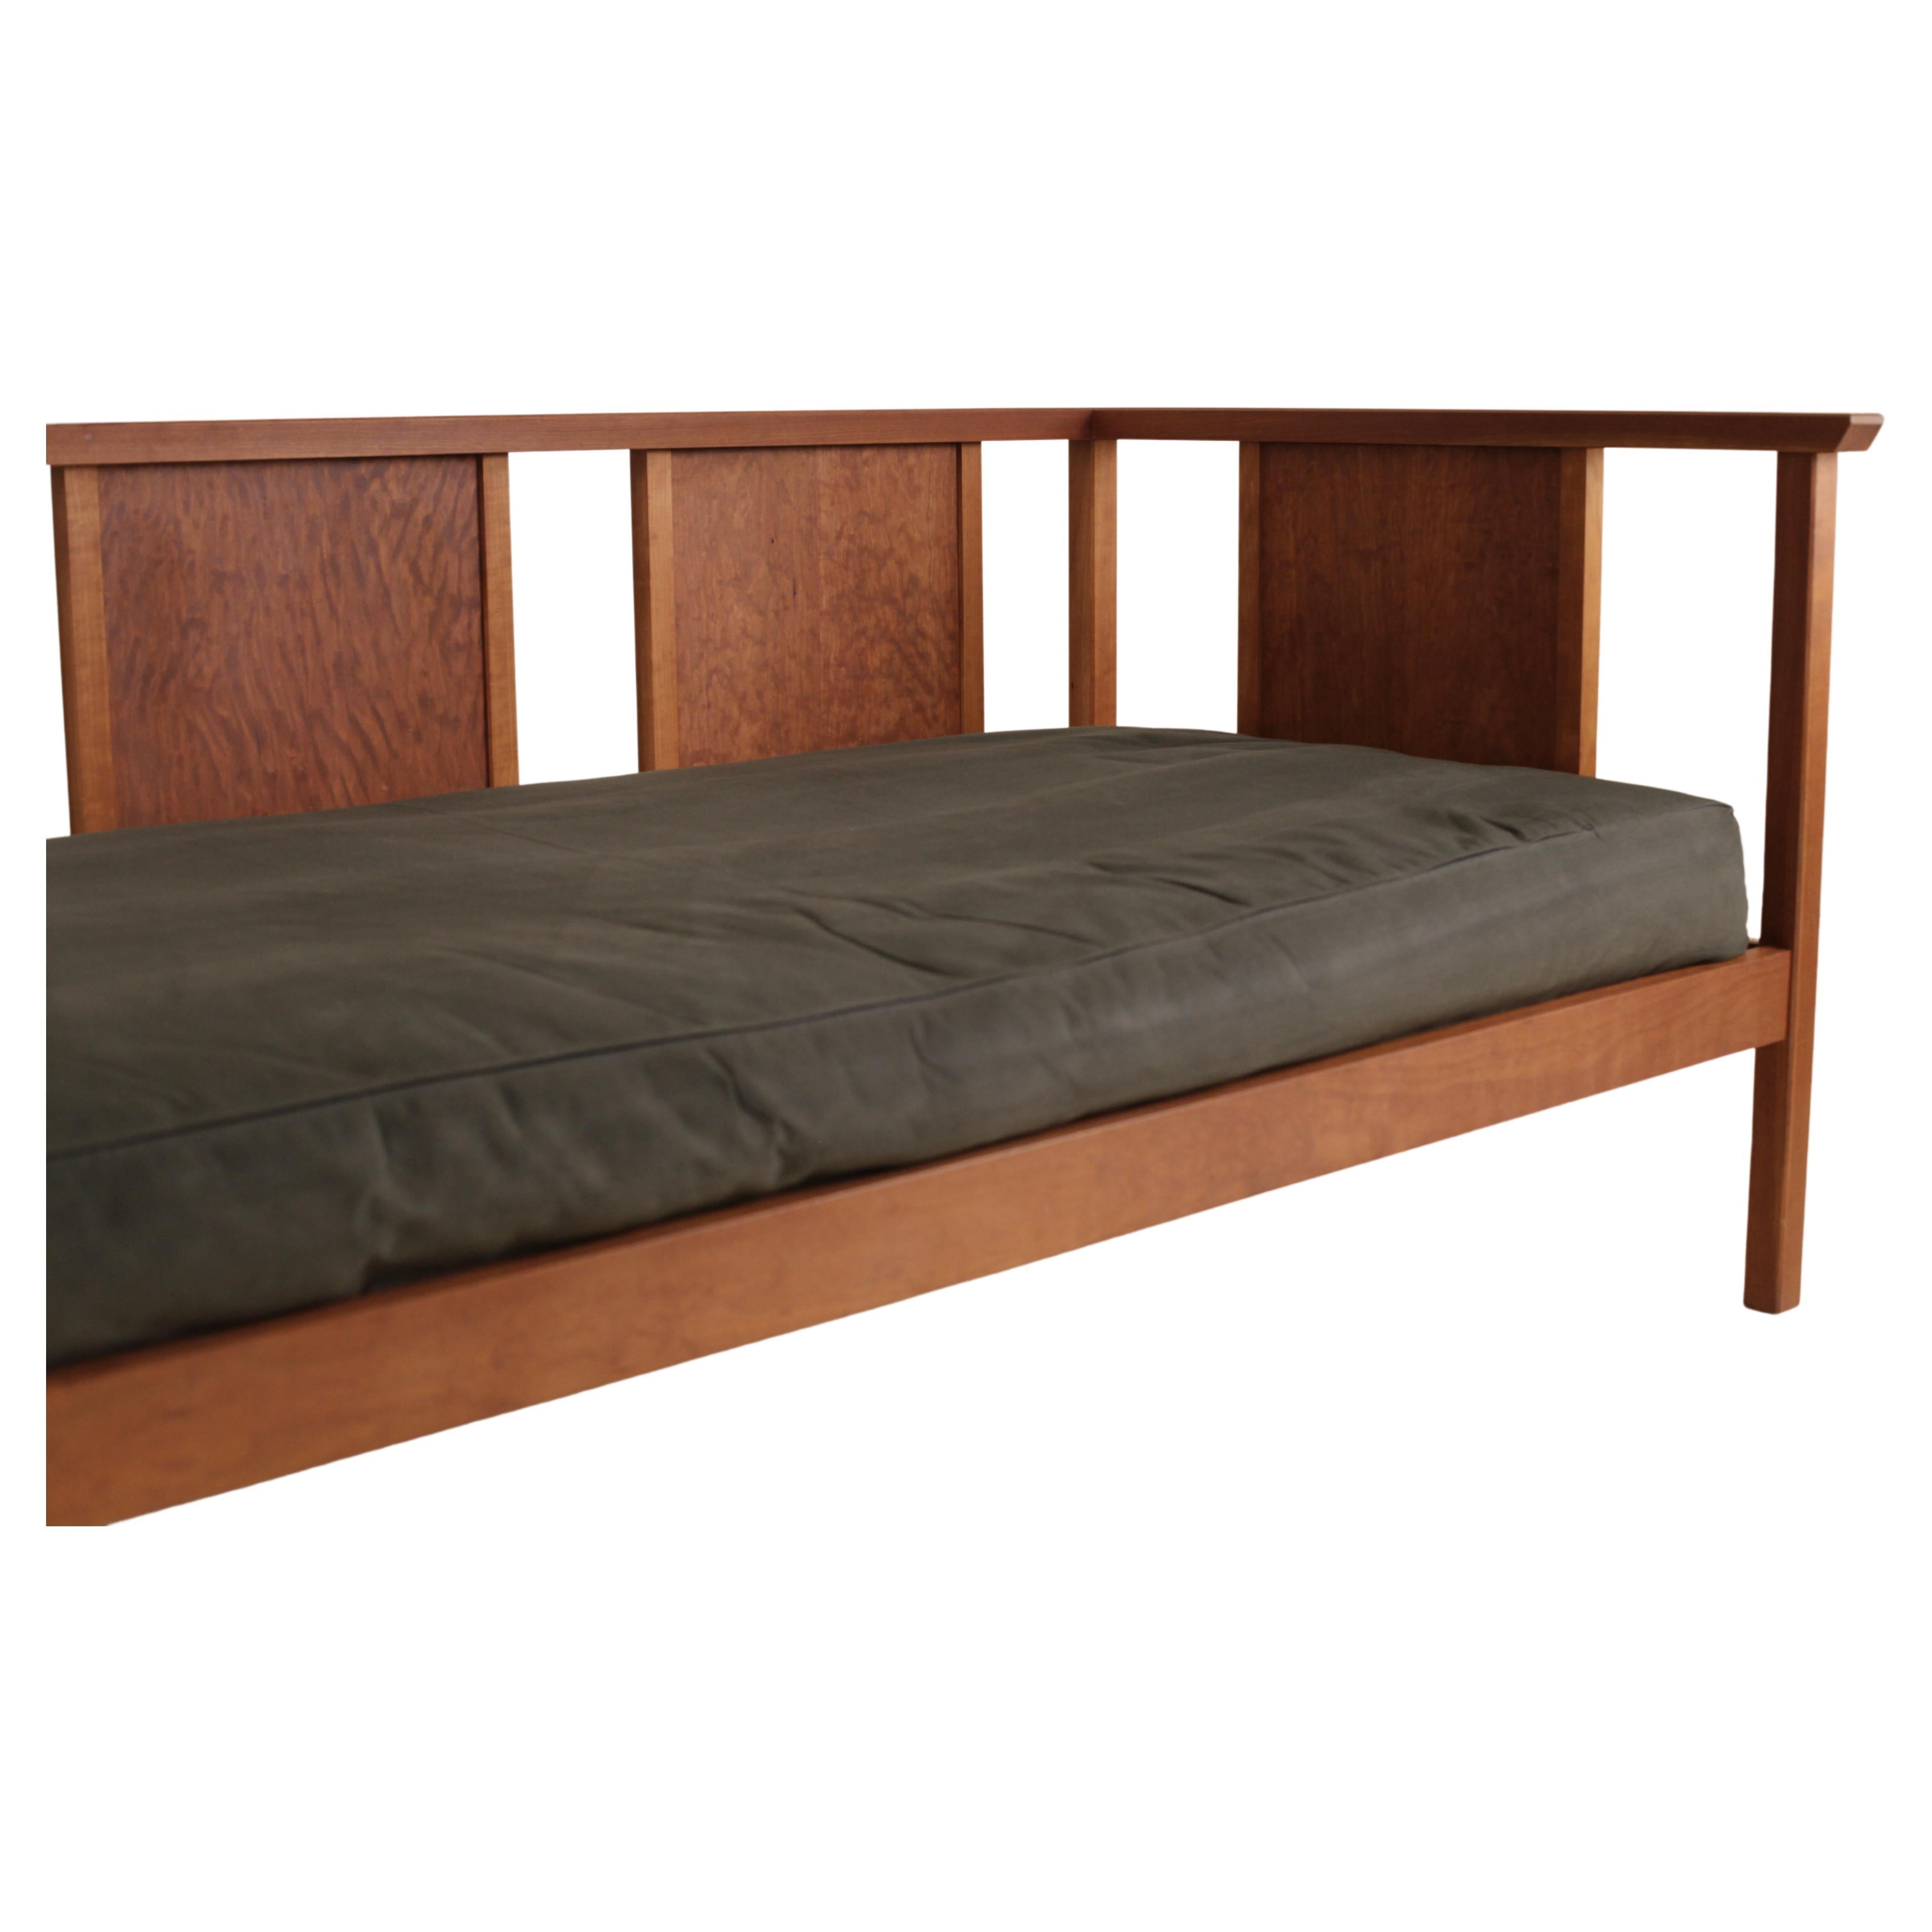 American Mid-Century Inspired Daybed or Couch in Cherry by Boyd & Allister  For Sale